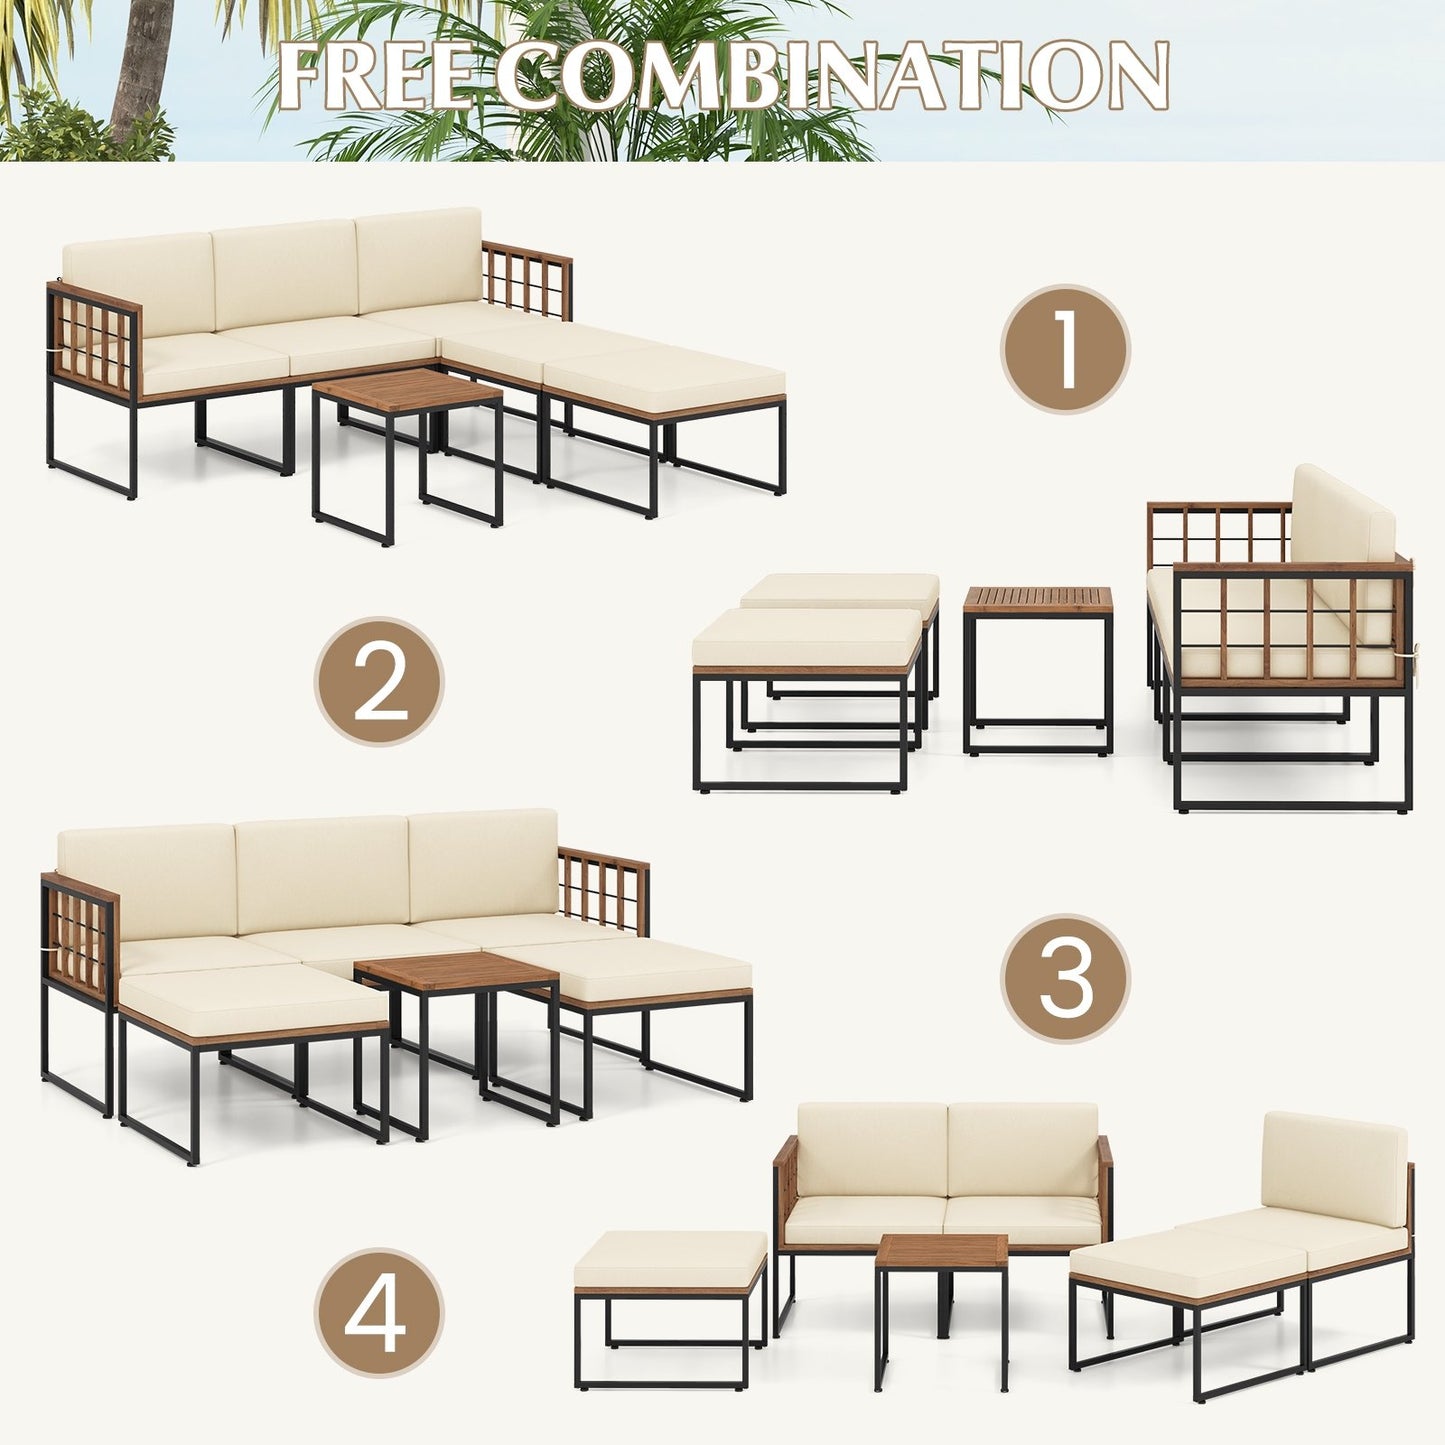 6 Pieces Acacia Wood Patio Furniture Set with Coffee Table and Ottomans, Beige